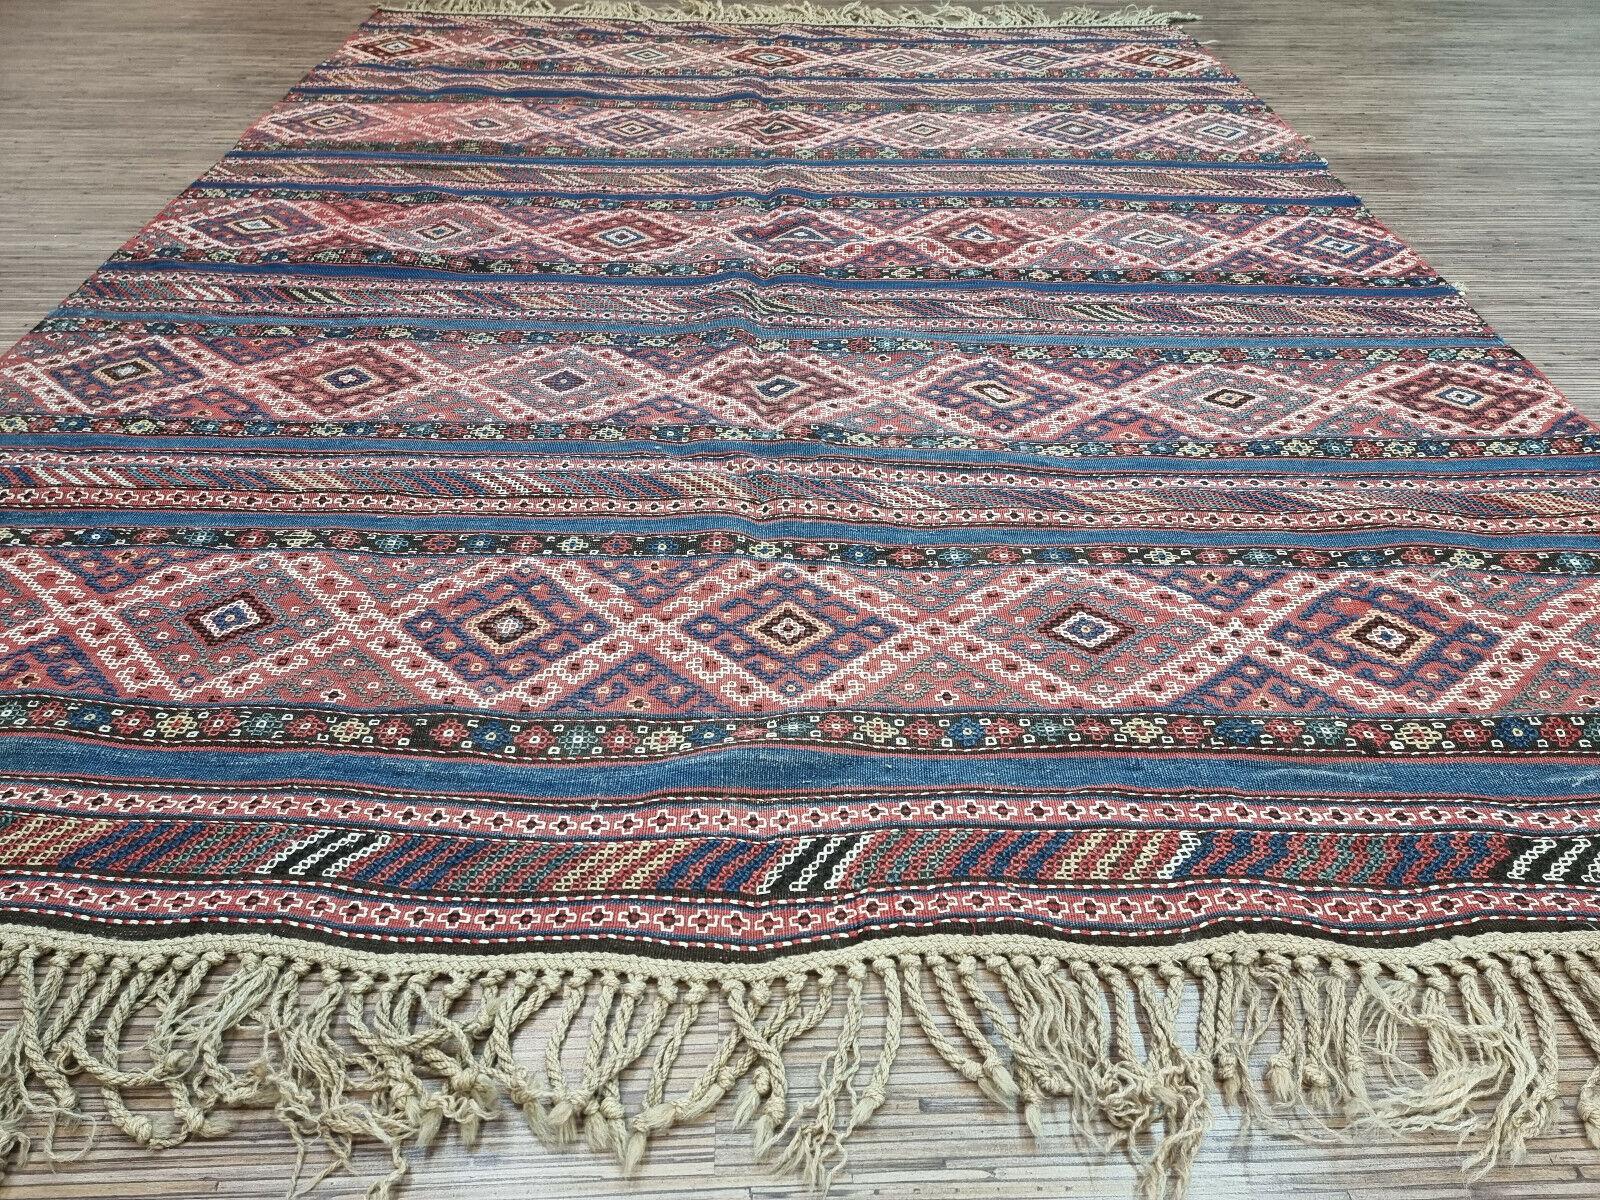 Hand-Knotted Handmade Antique Persian Style Sumak Kilim Rug 5.4' x 7', 1920s - 1D86